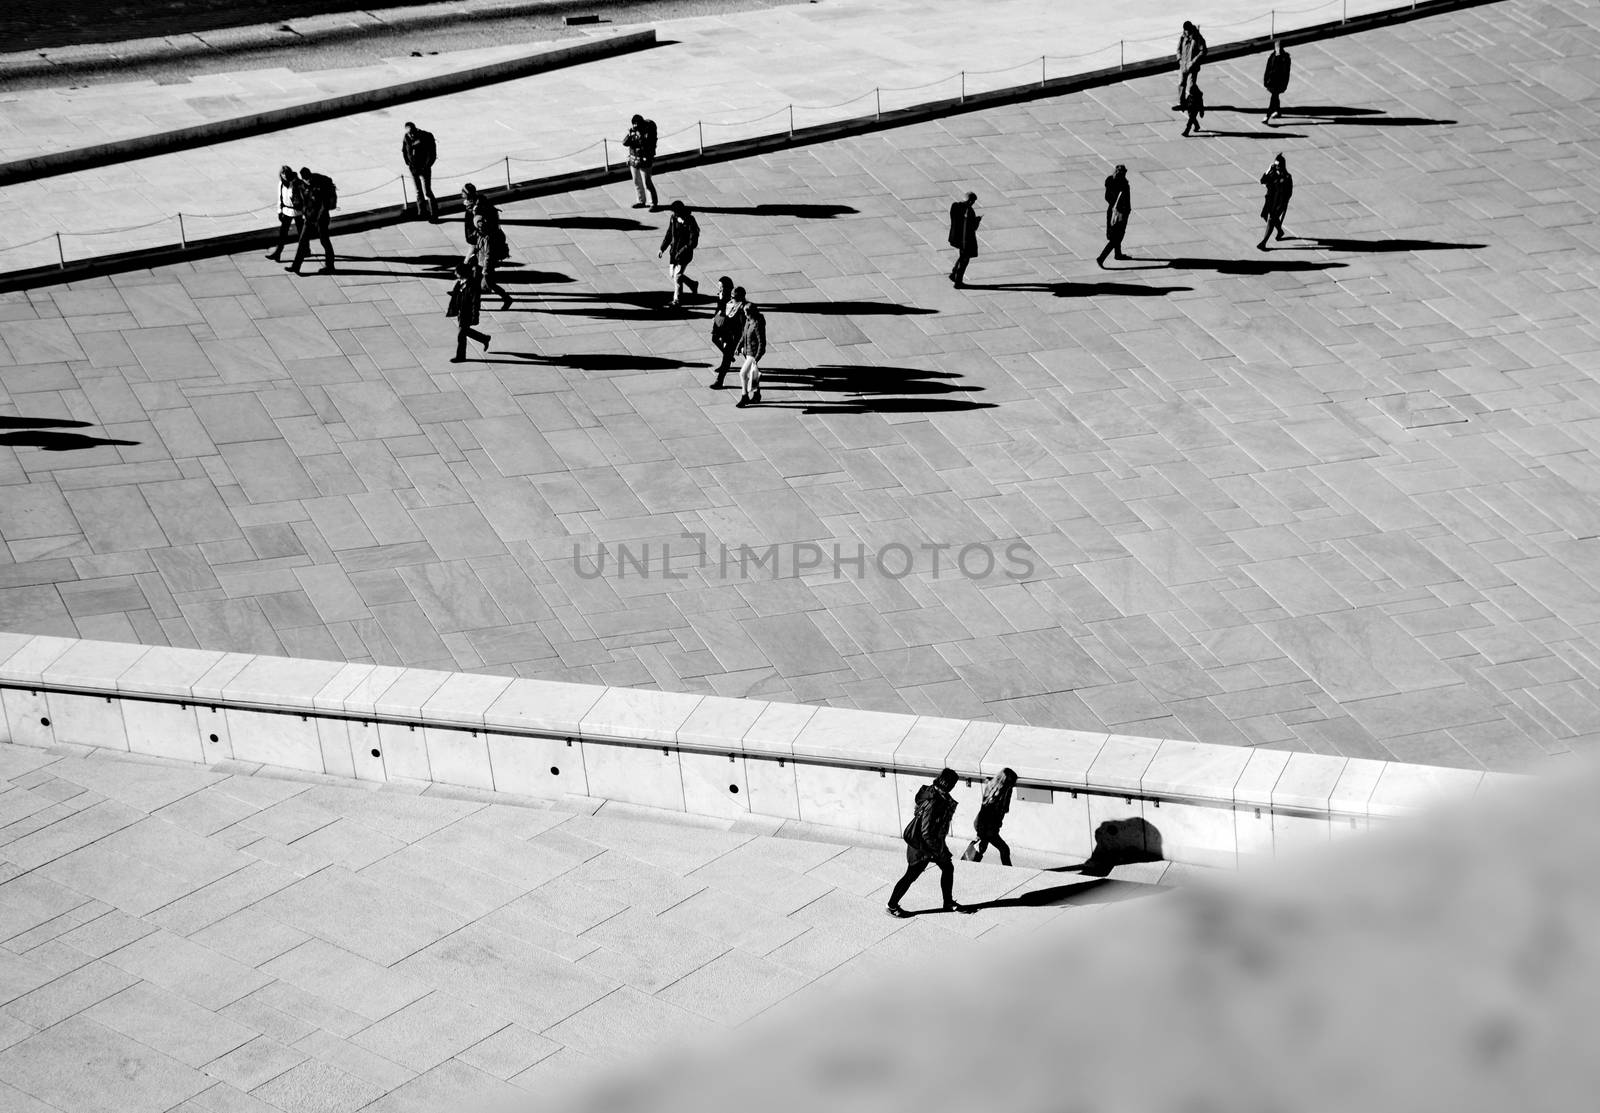 OSLO - MARCH 21: People hanging around in Opera house in Oslo